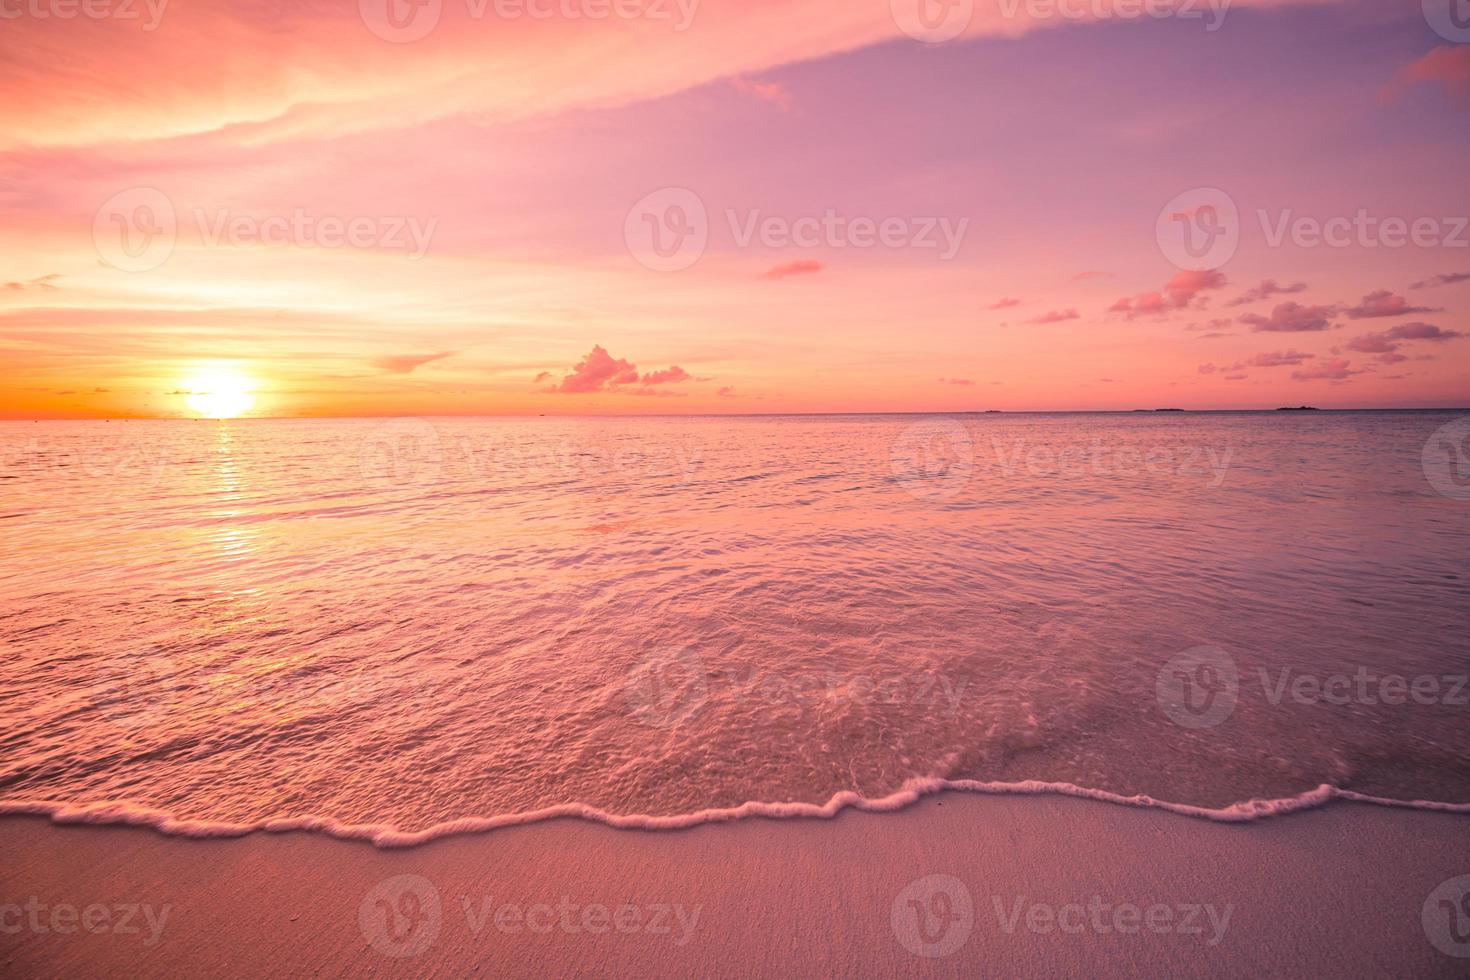 Dreamy beach scene with stunning waves. Colorful ocean beach sunrise or sunset, colorful bright sky and sun rays. Inspirational shoreline with soft tropical waves and relaxing mood. Peaceful, serene photo